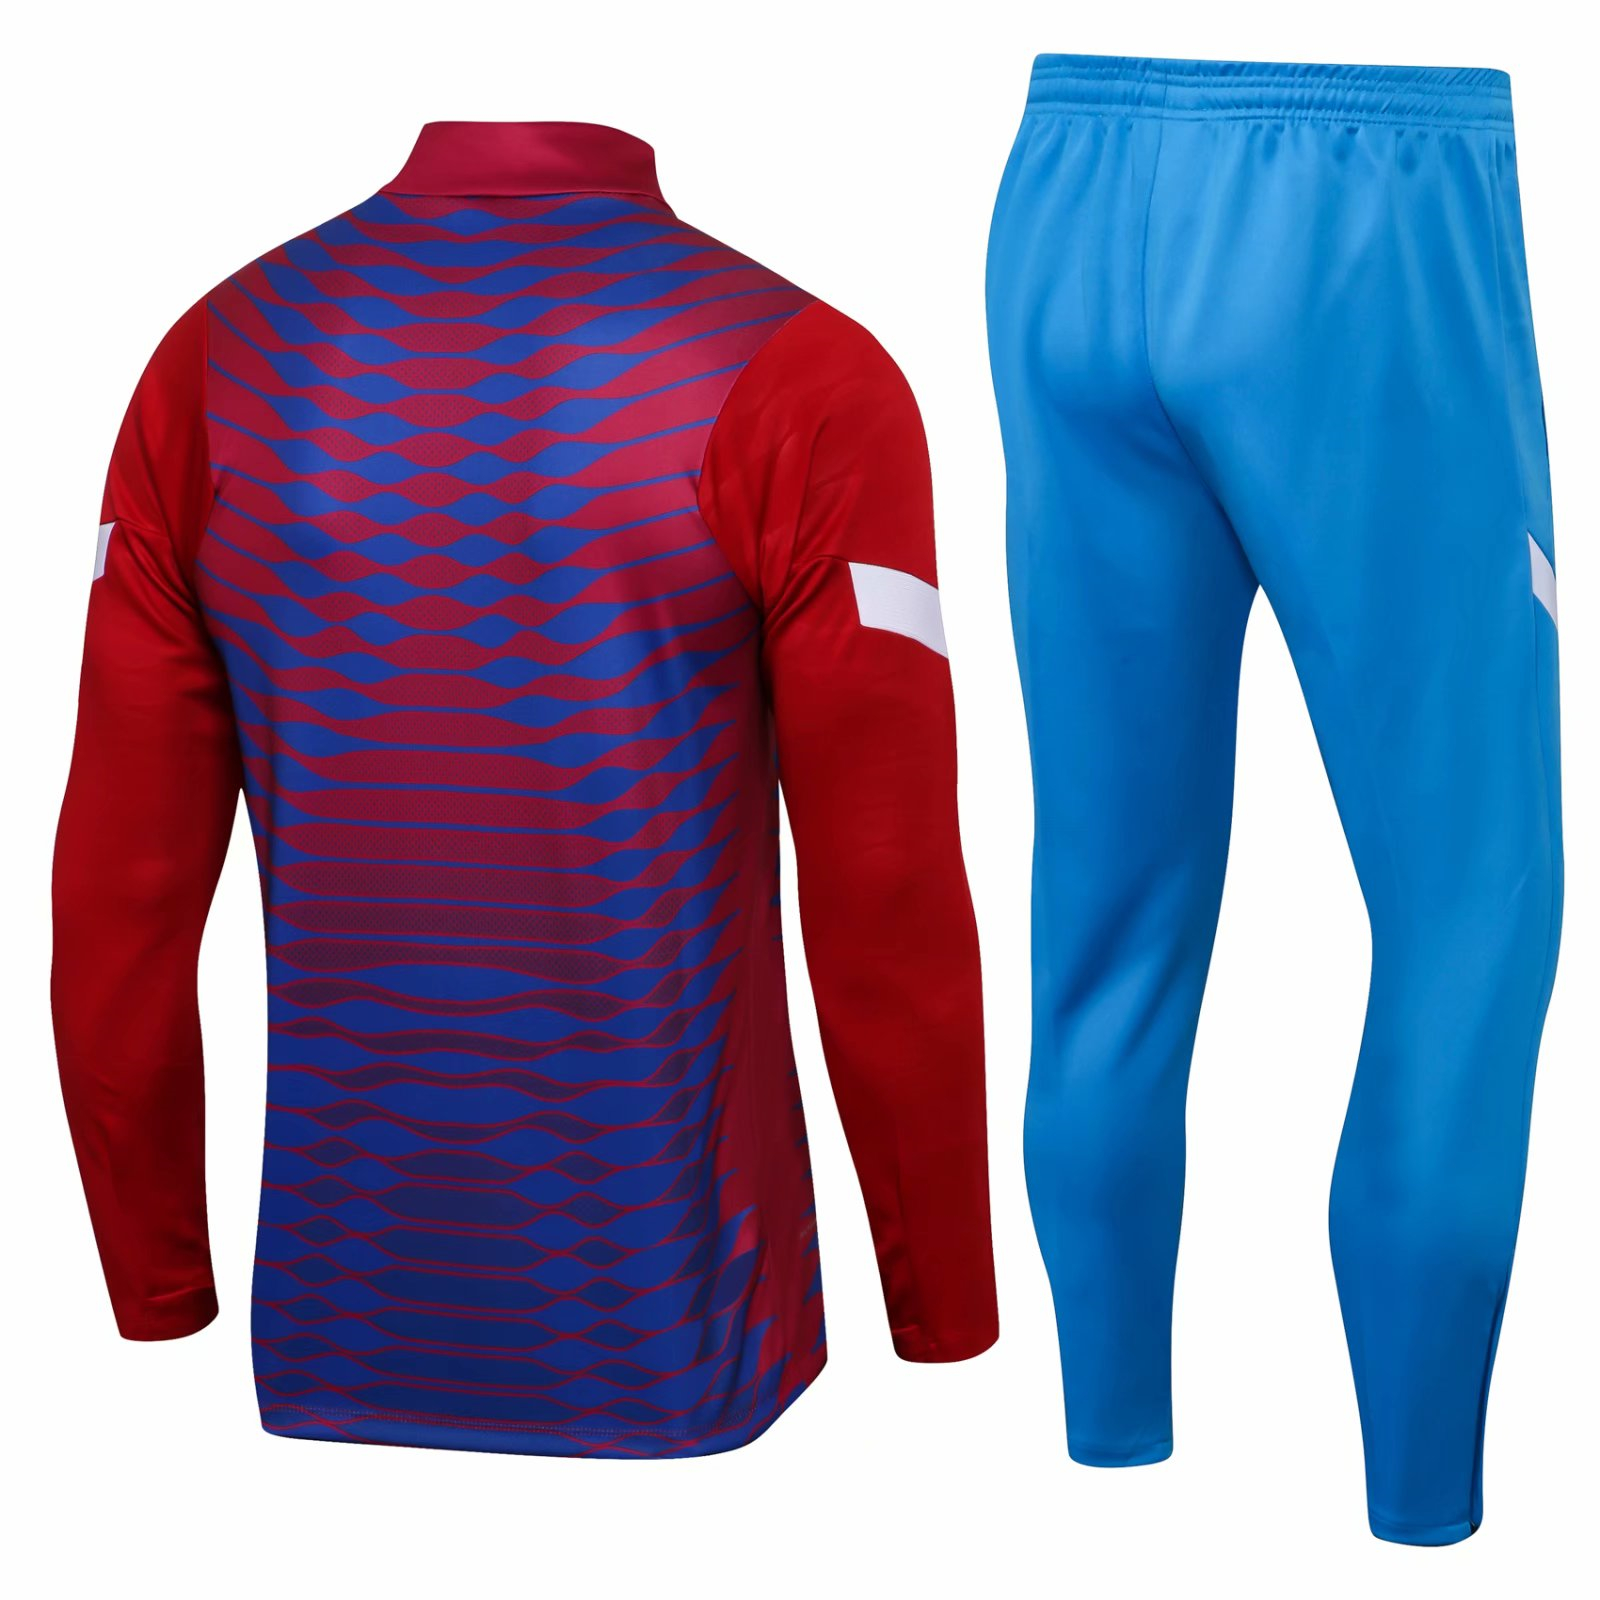 Barcelona 2021/22 Red Graphic Soccer Training Suit Mens